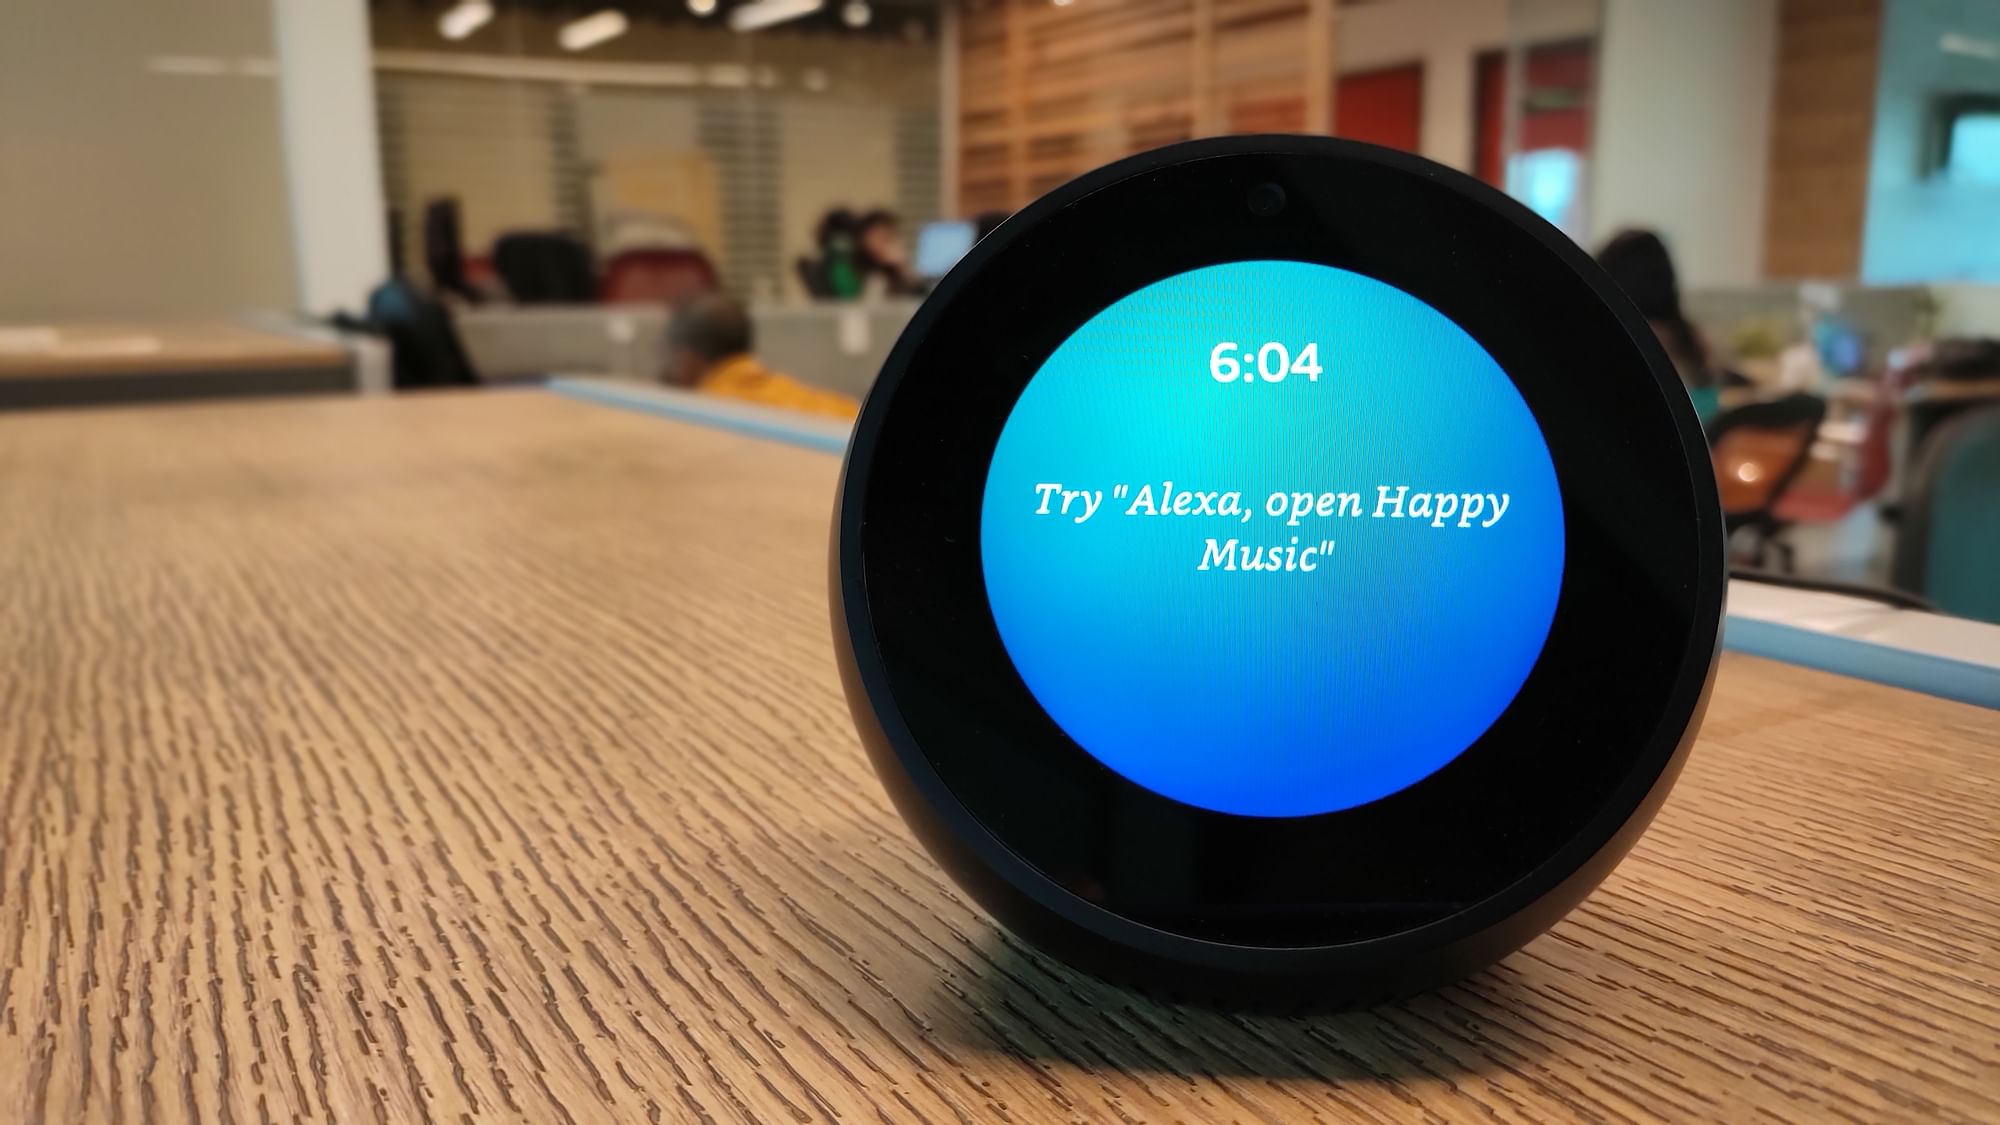 The Amazon Echo Spot is an Alexa-enabled device with a screen.